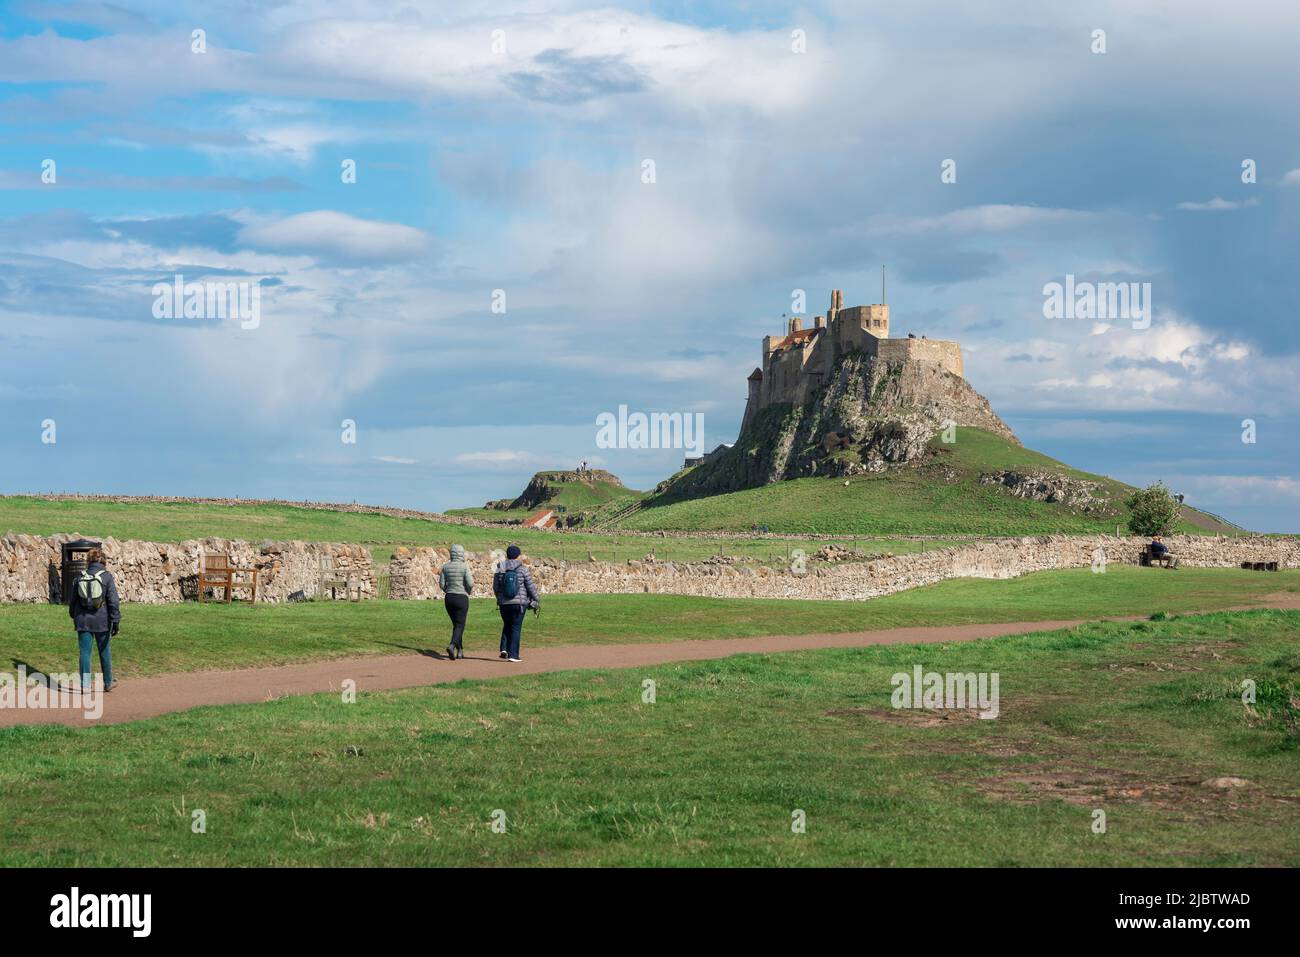 Holy Island Lindisfarne, view in summer of people walking towards the 16th century castle sited on Holy Island (Lindisfarne), England, UK Stock Photo